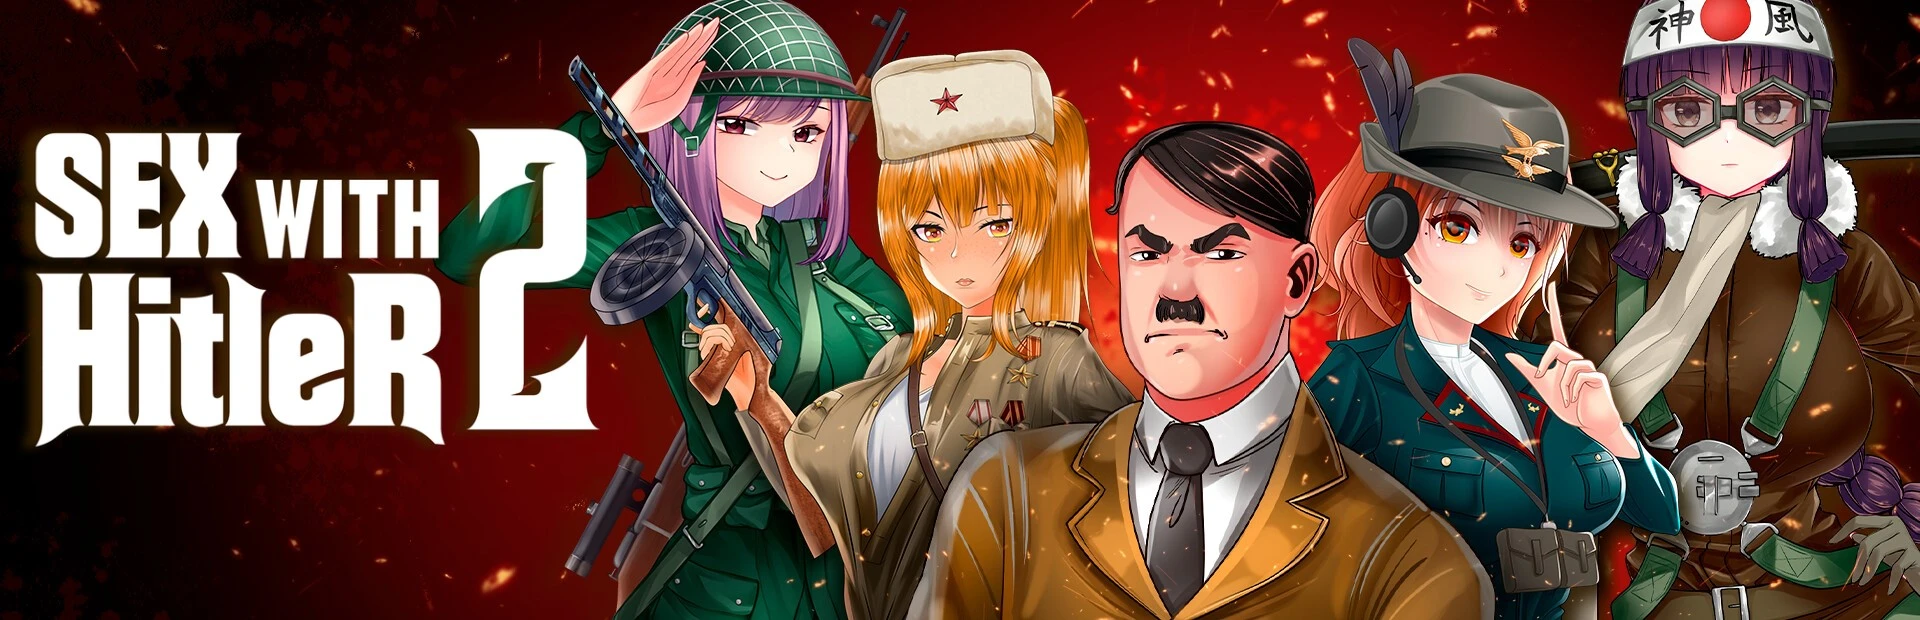 Sex with Hitler 2 main image